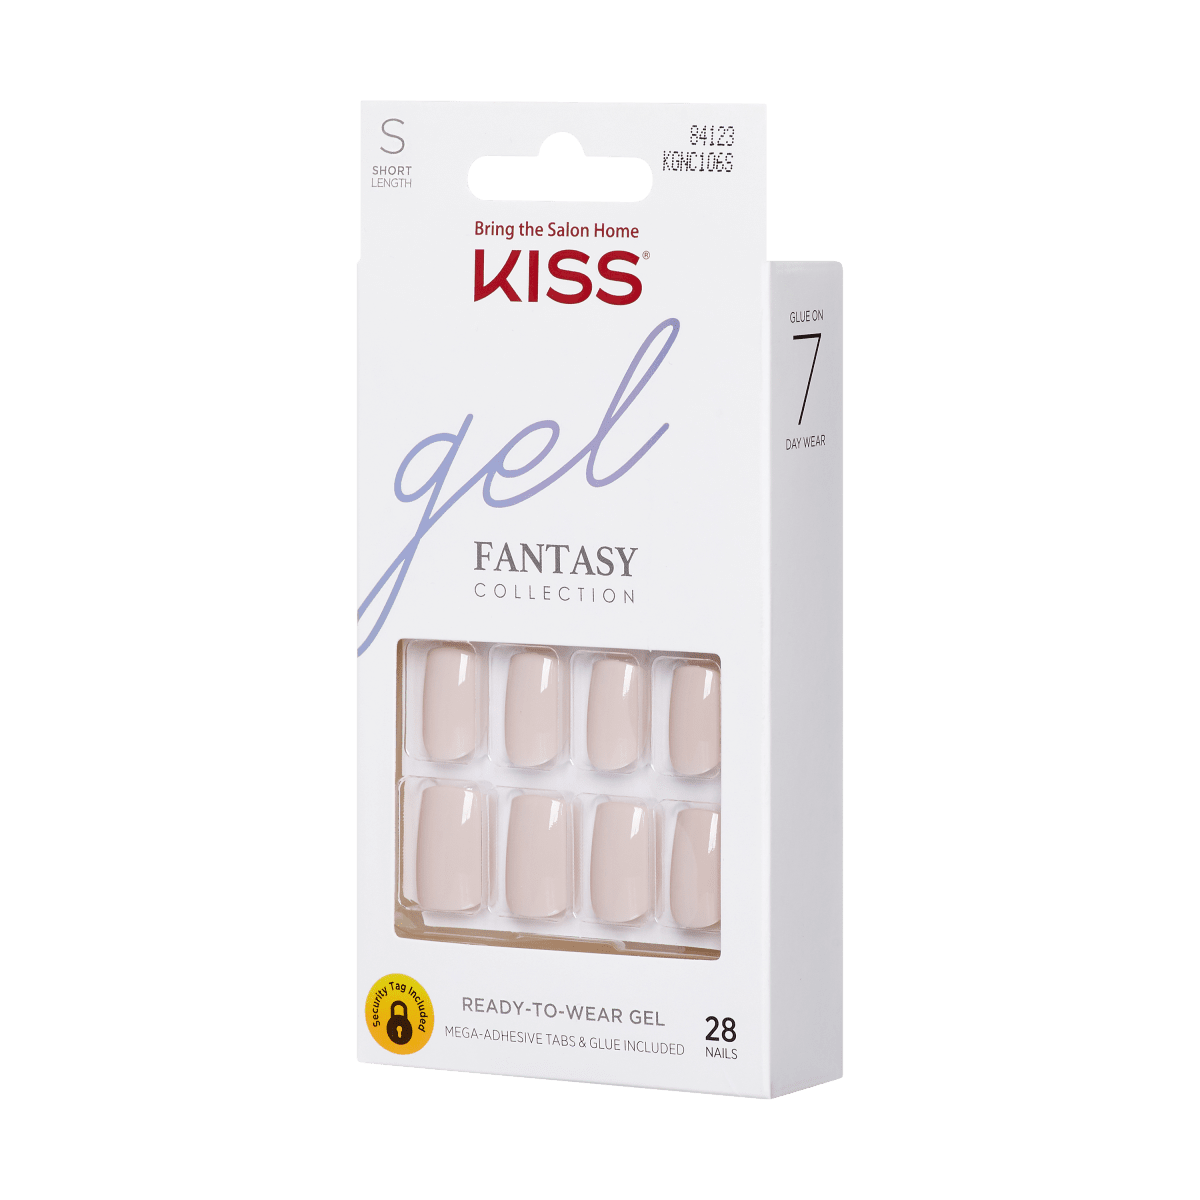 KISS Gel Fantasy, Press-On Nails, Here I Am, Beige, Short Squoval, 28ct